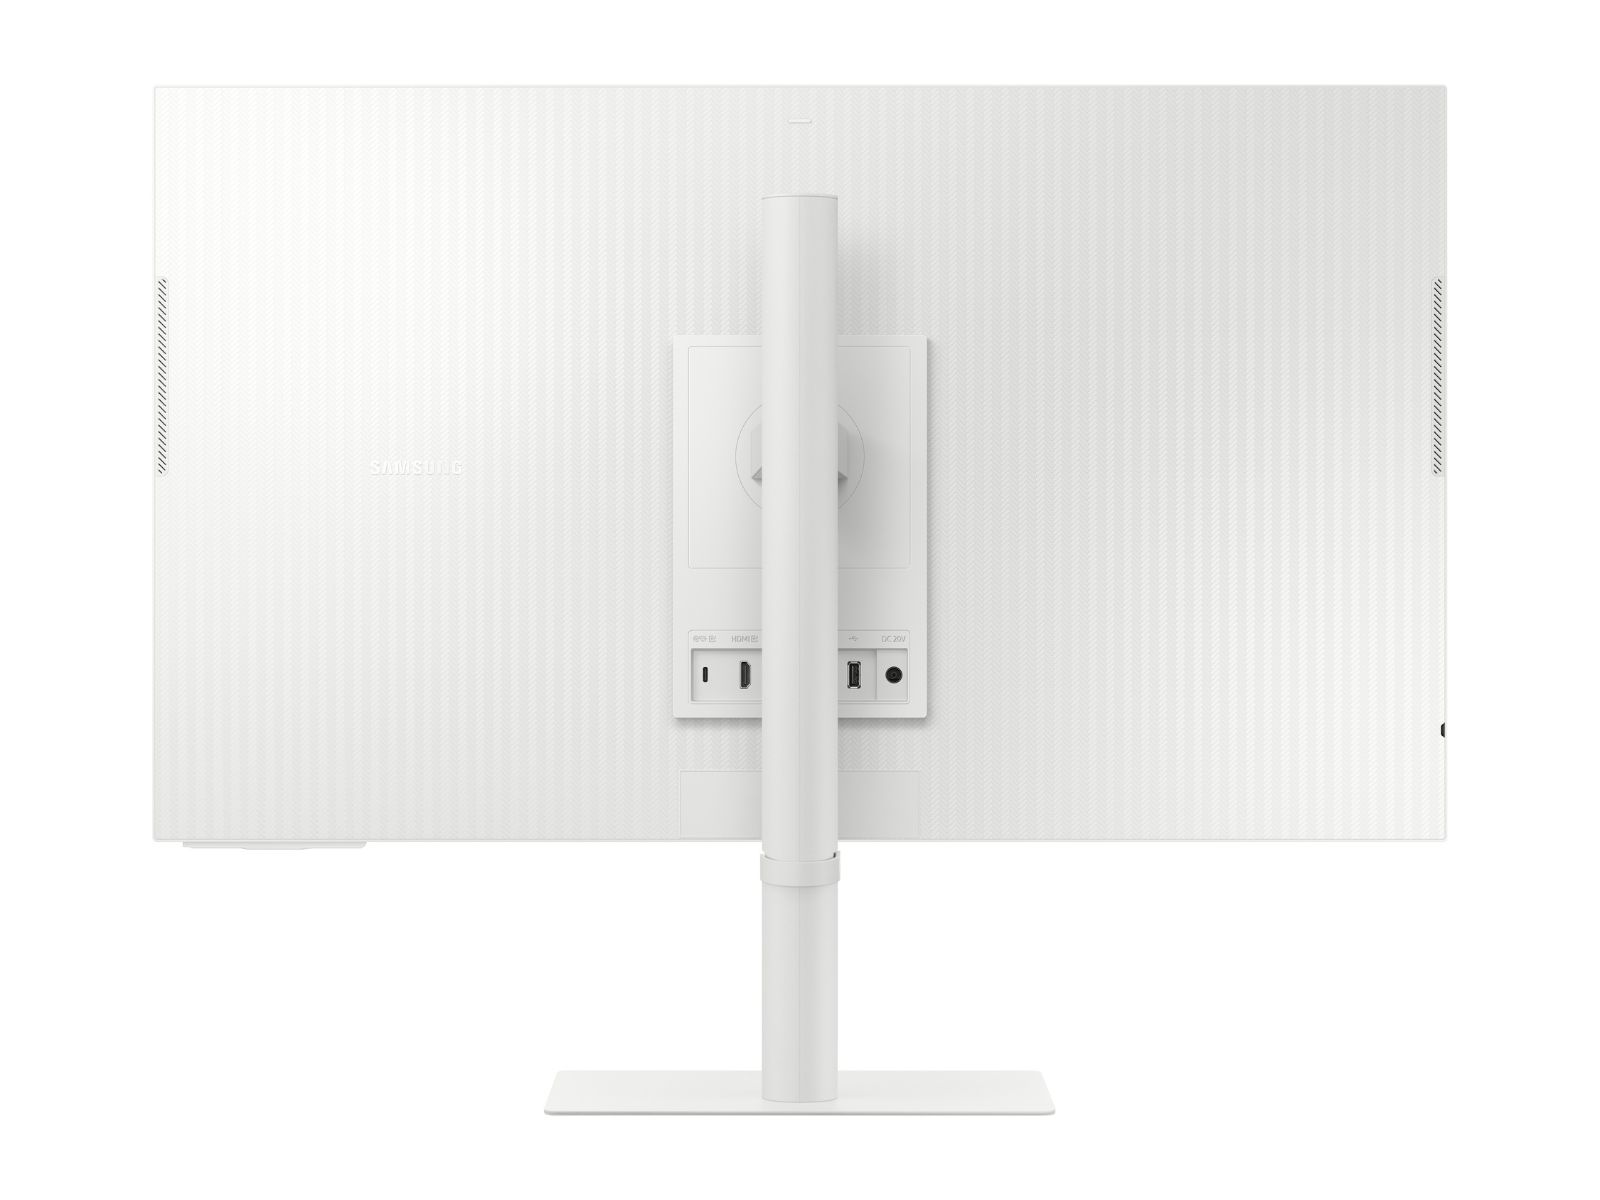 Thumbnail image of 32” M70C Smart Monitor 4K UHD with Streaming TV USB-C and Ergonomic Stand